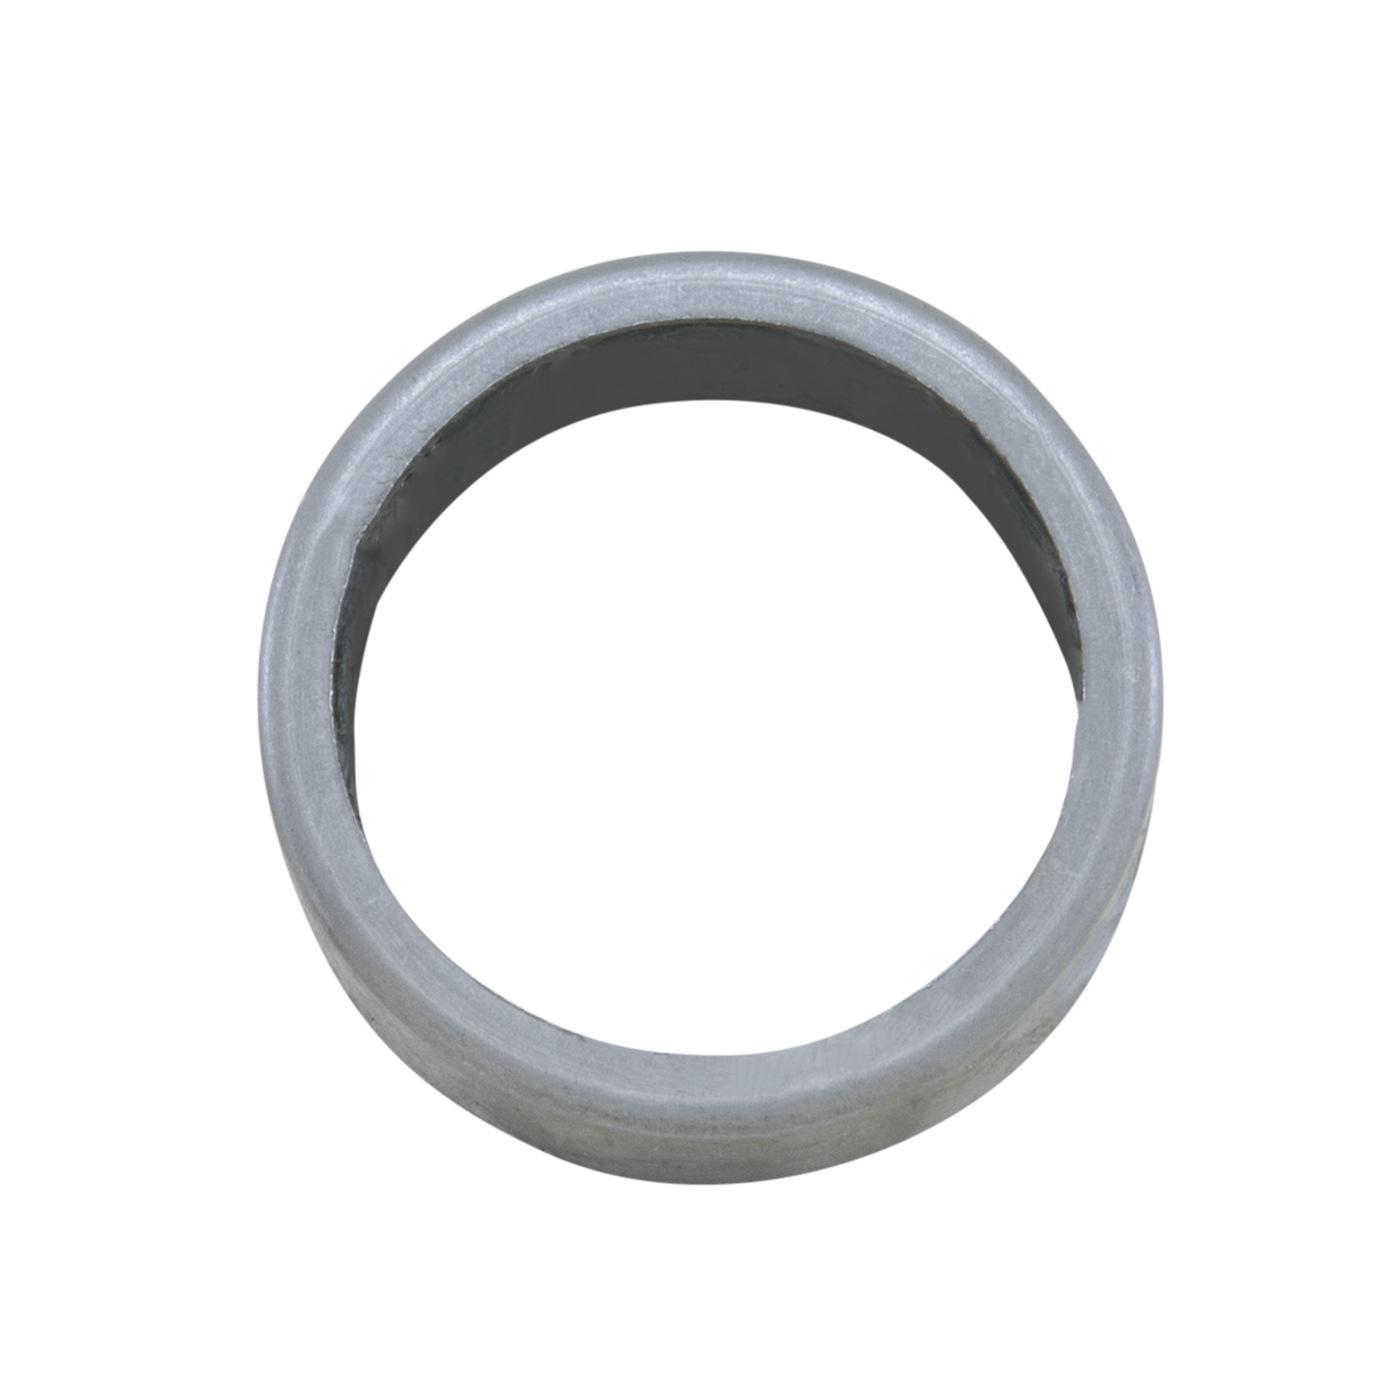 Spindle bearing for Dana 44 